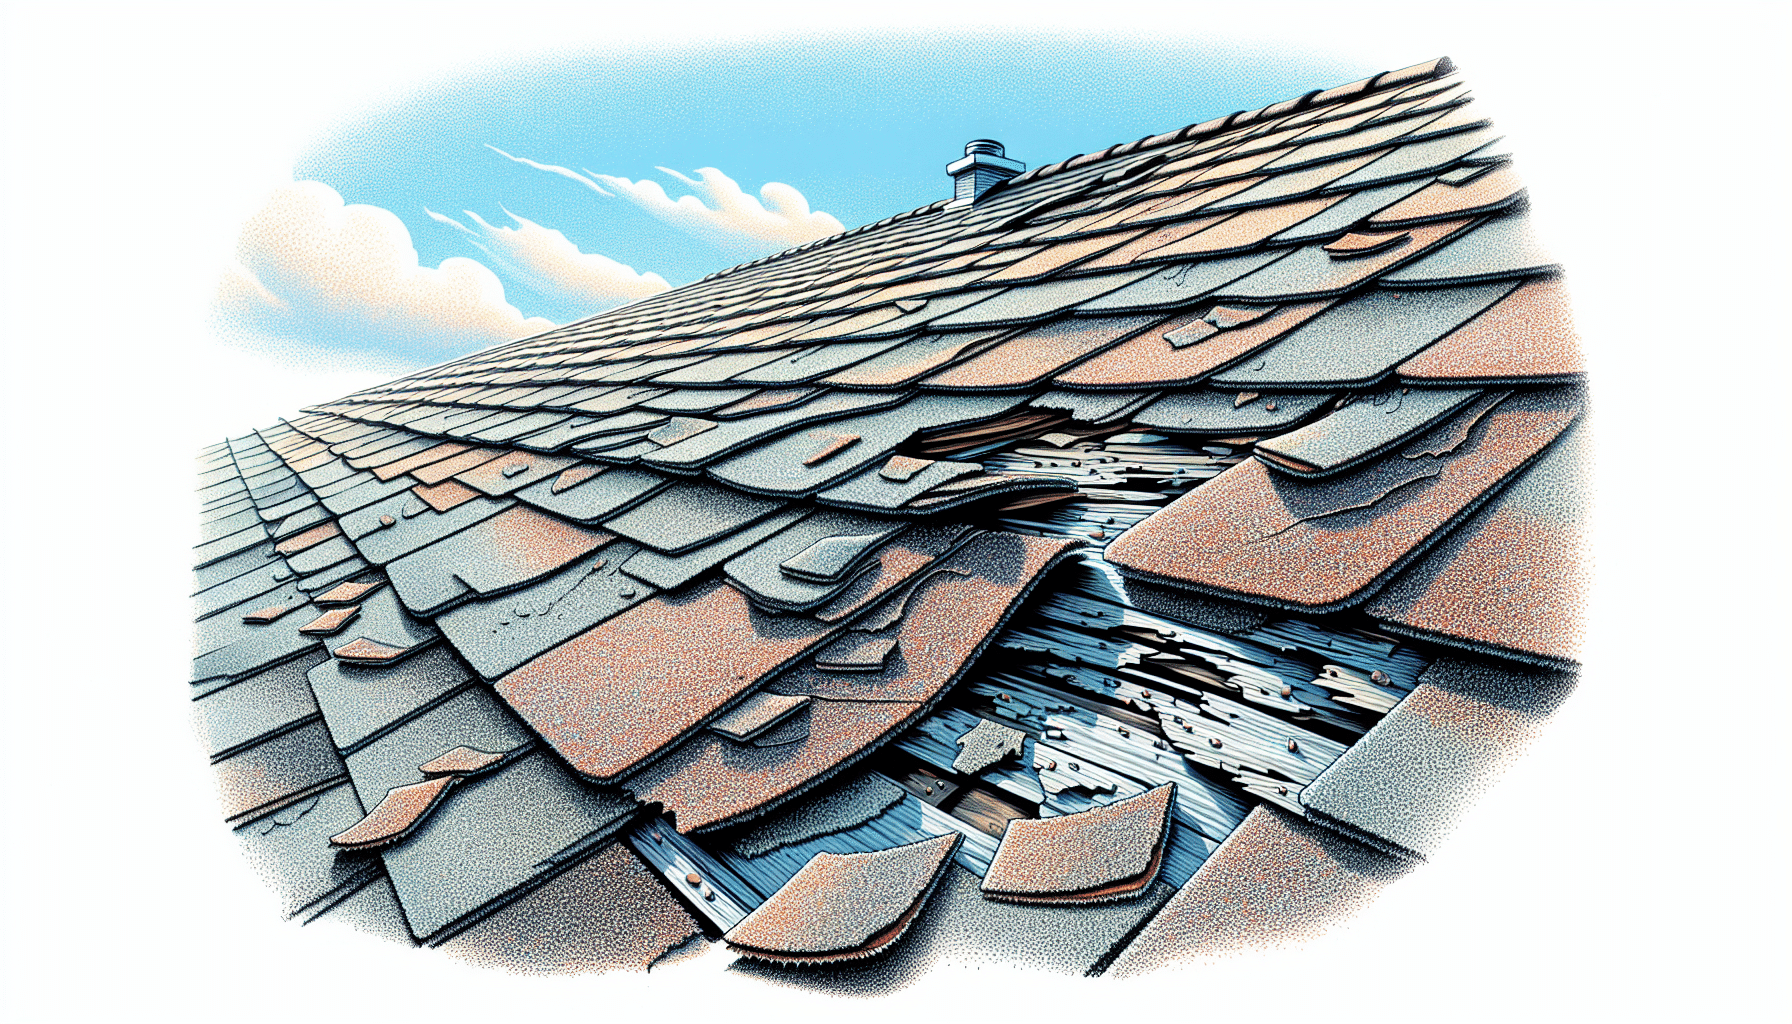 Illustration of aging asphalt shingles with missing granules and curling shingles